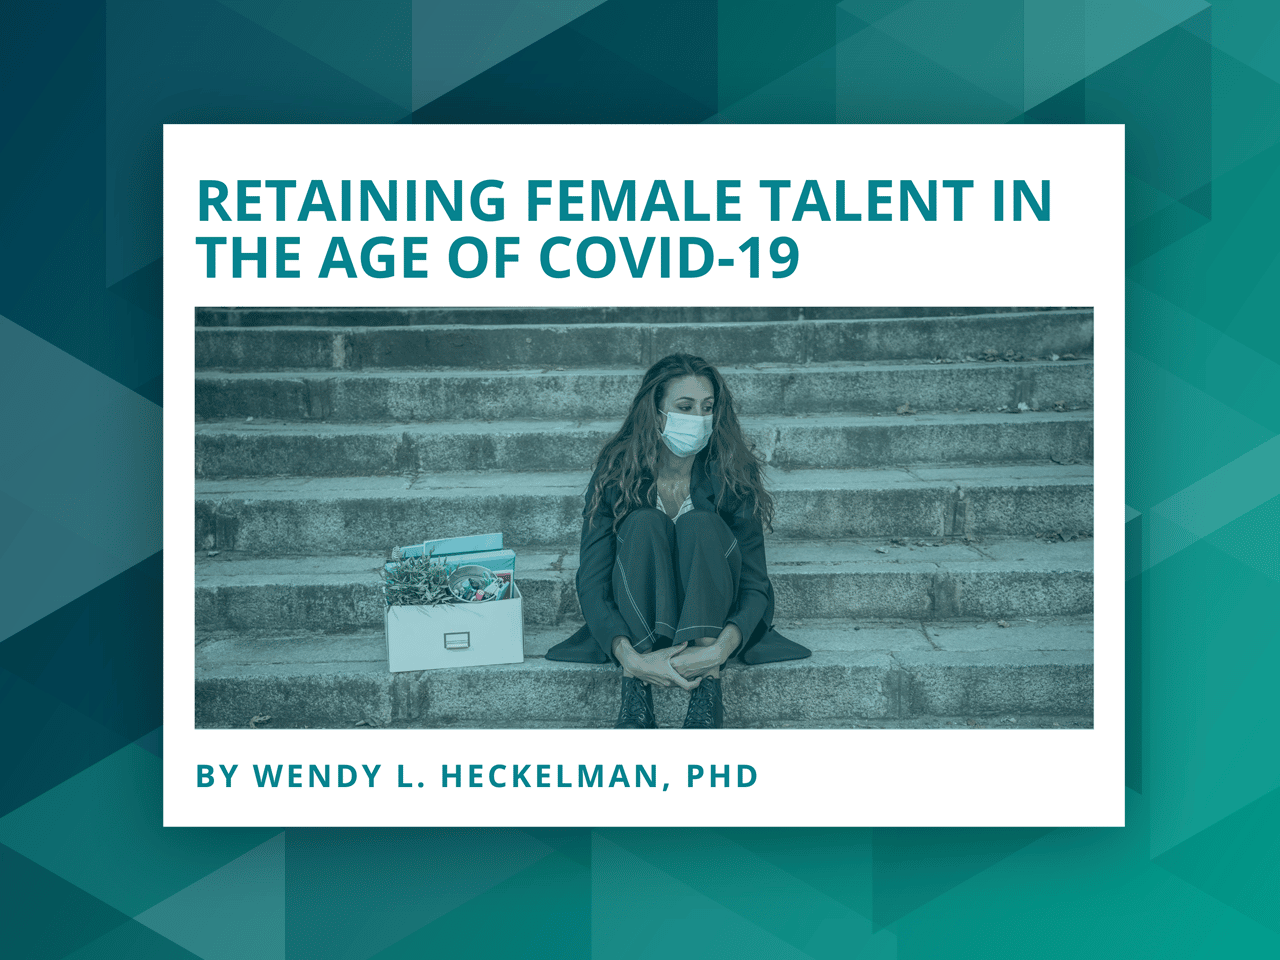 Retaining Female Talent in the Age of COVID-19